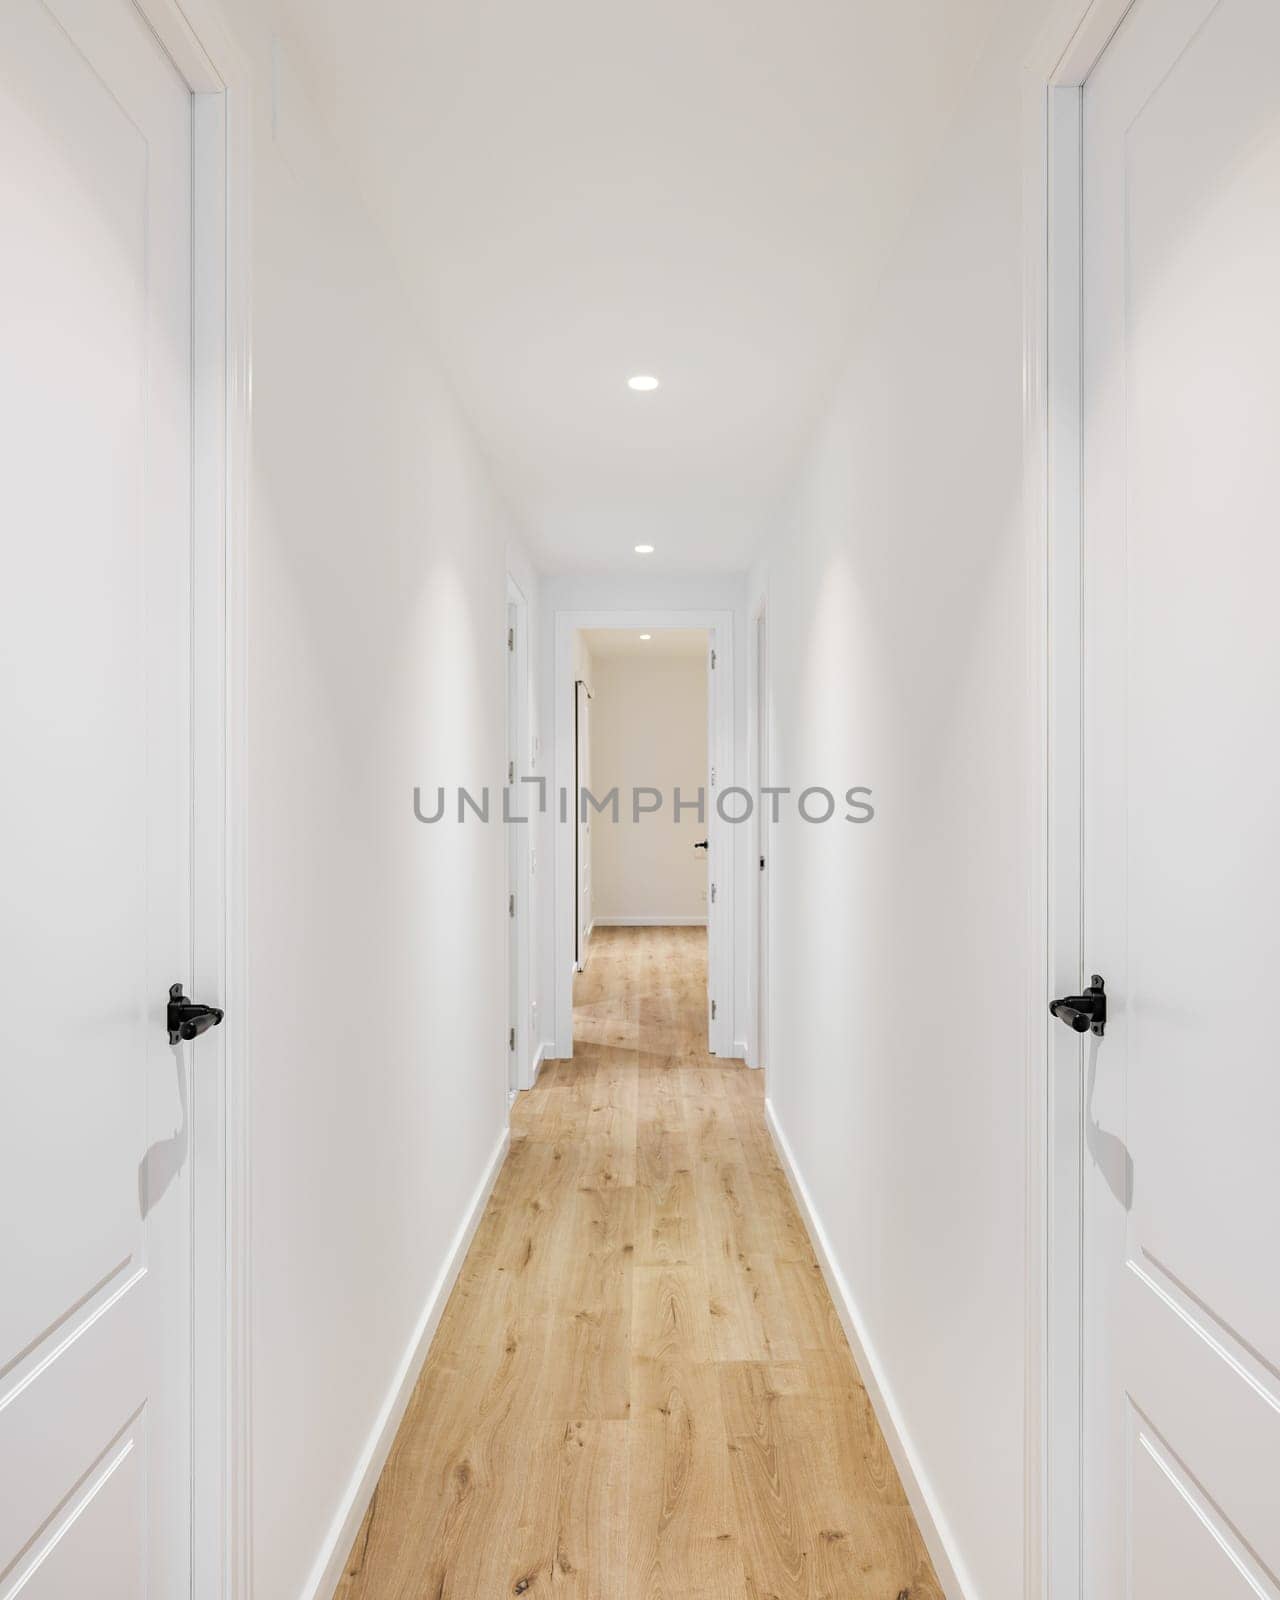 Long narrow straight corridor with doors on the left and right in a mini hotel after renovation. Concept of a cozy hotel and rooms for vacation or business trip. Copyspace.